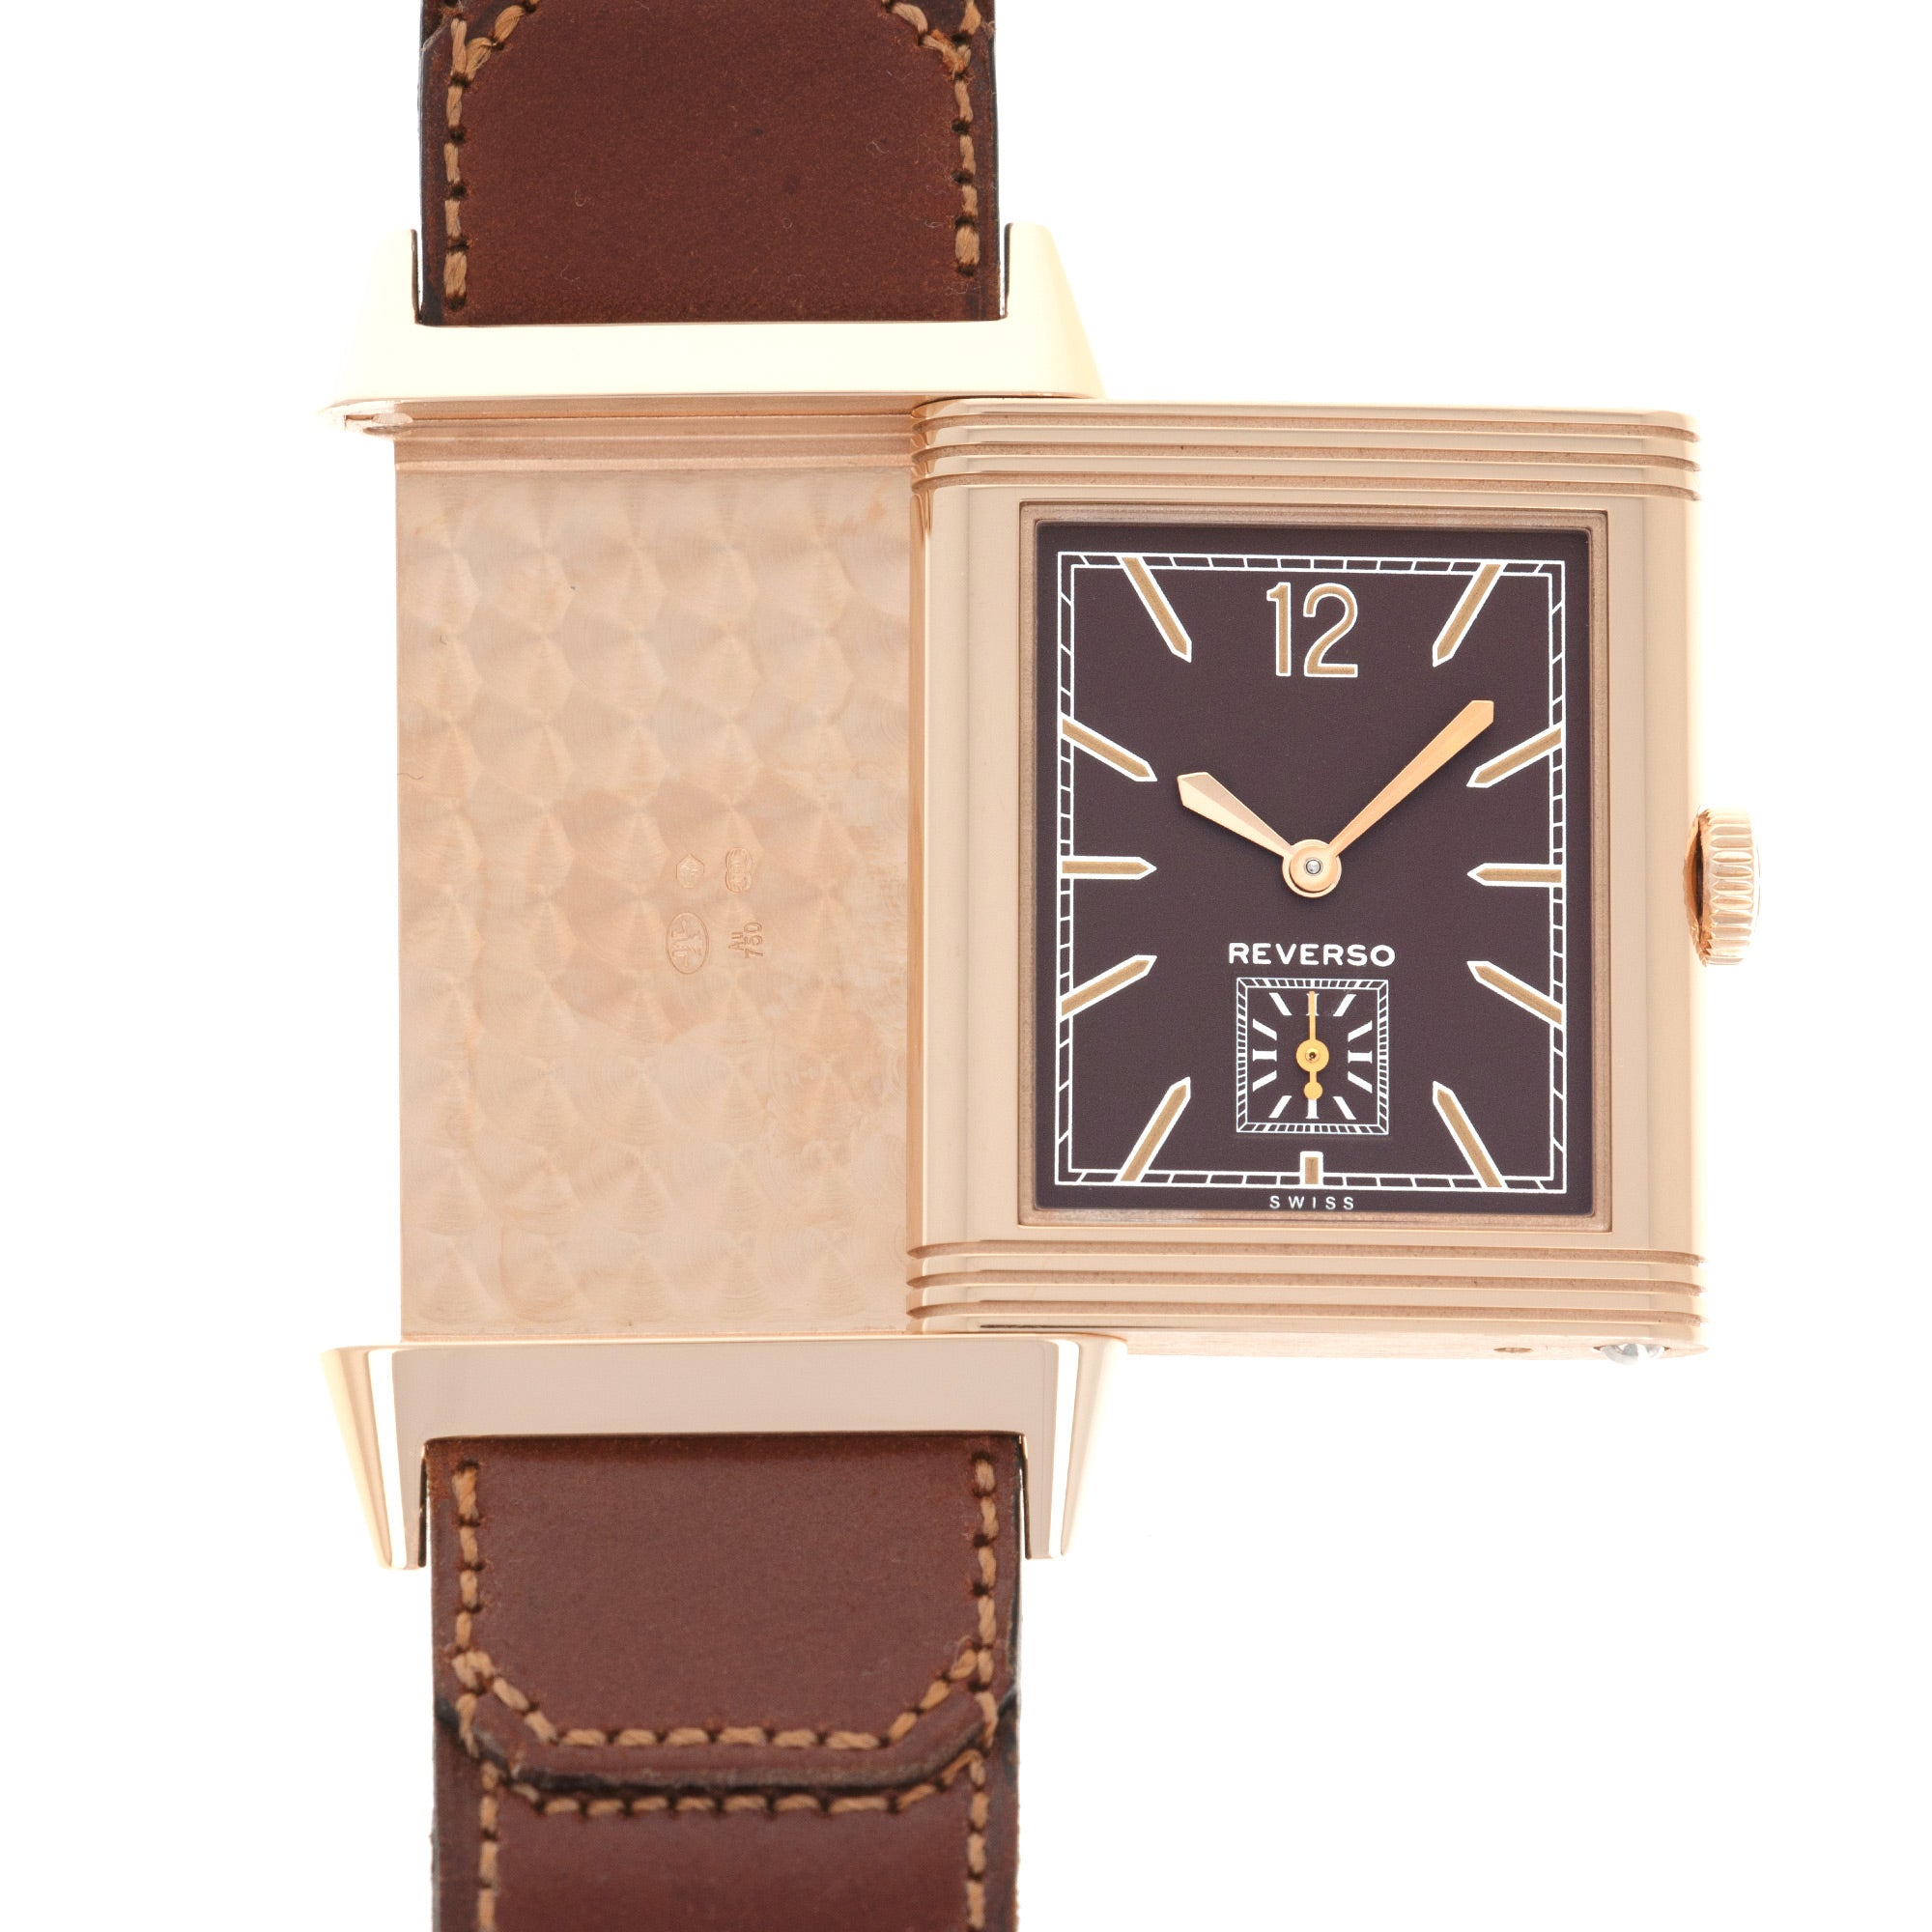 Jaeger LeCoultre - Jaeger LeCoultre Rose Gold Grand Reverso Ultra Thin 1931 Watch - The Keystone Watches